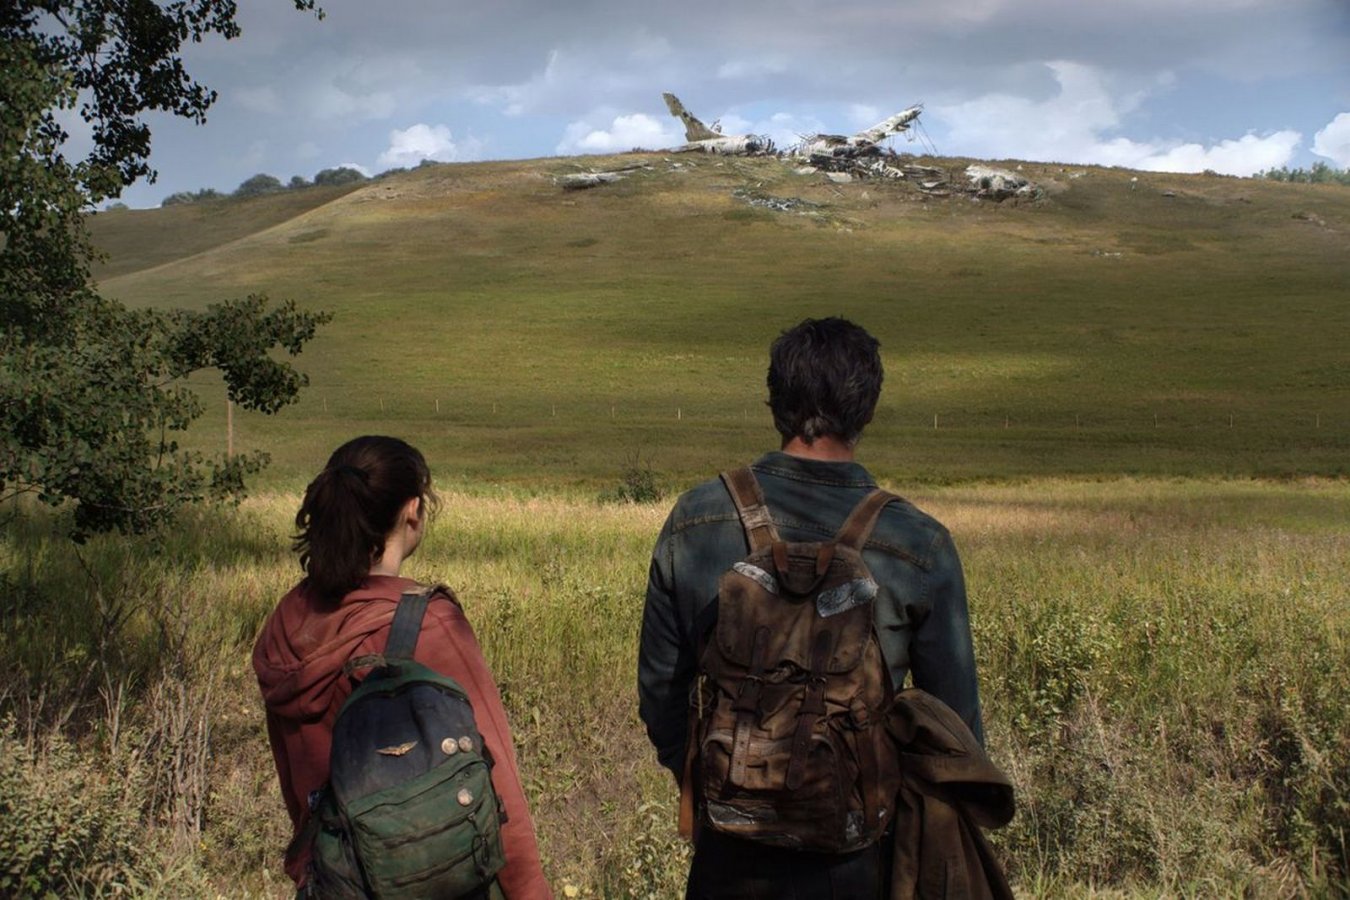 The Last of Us series will be released in early 2023